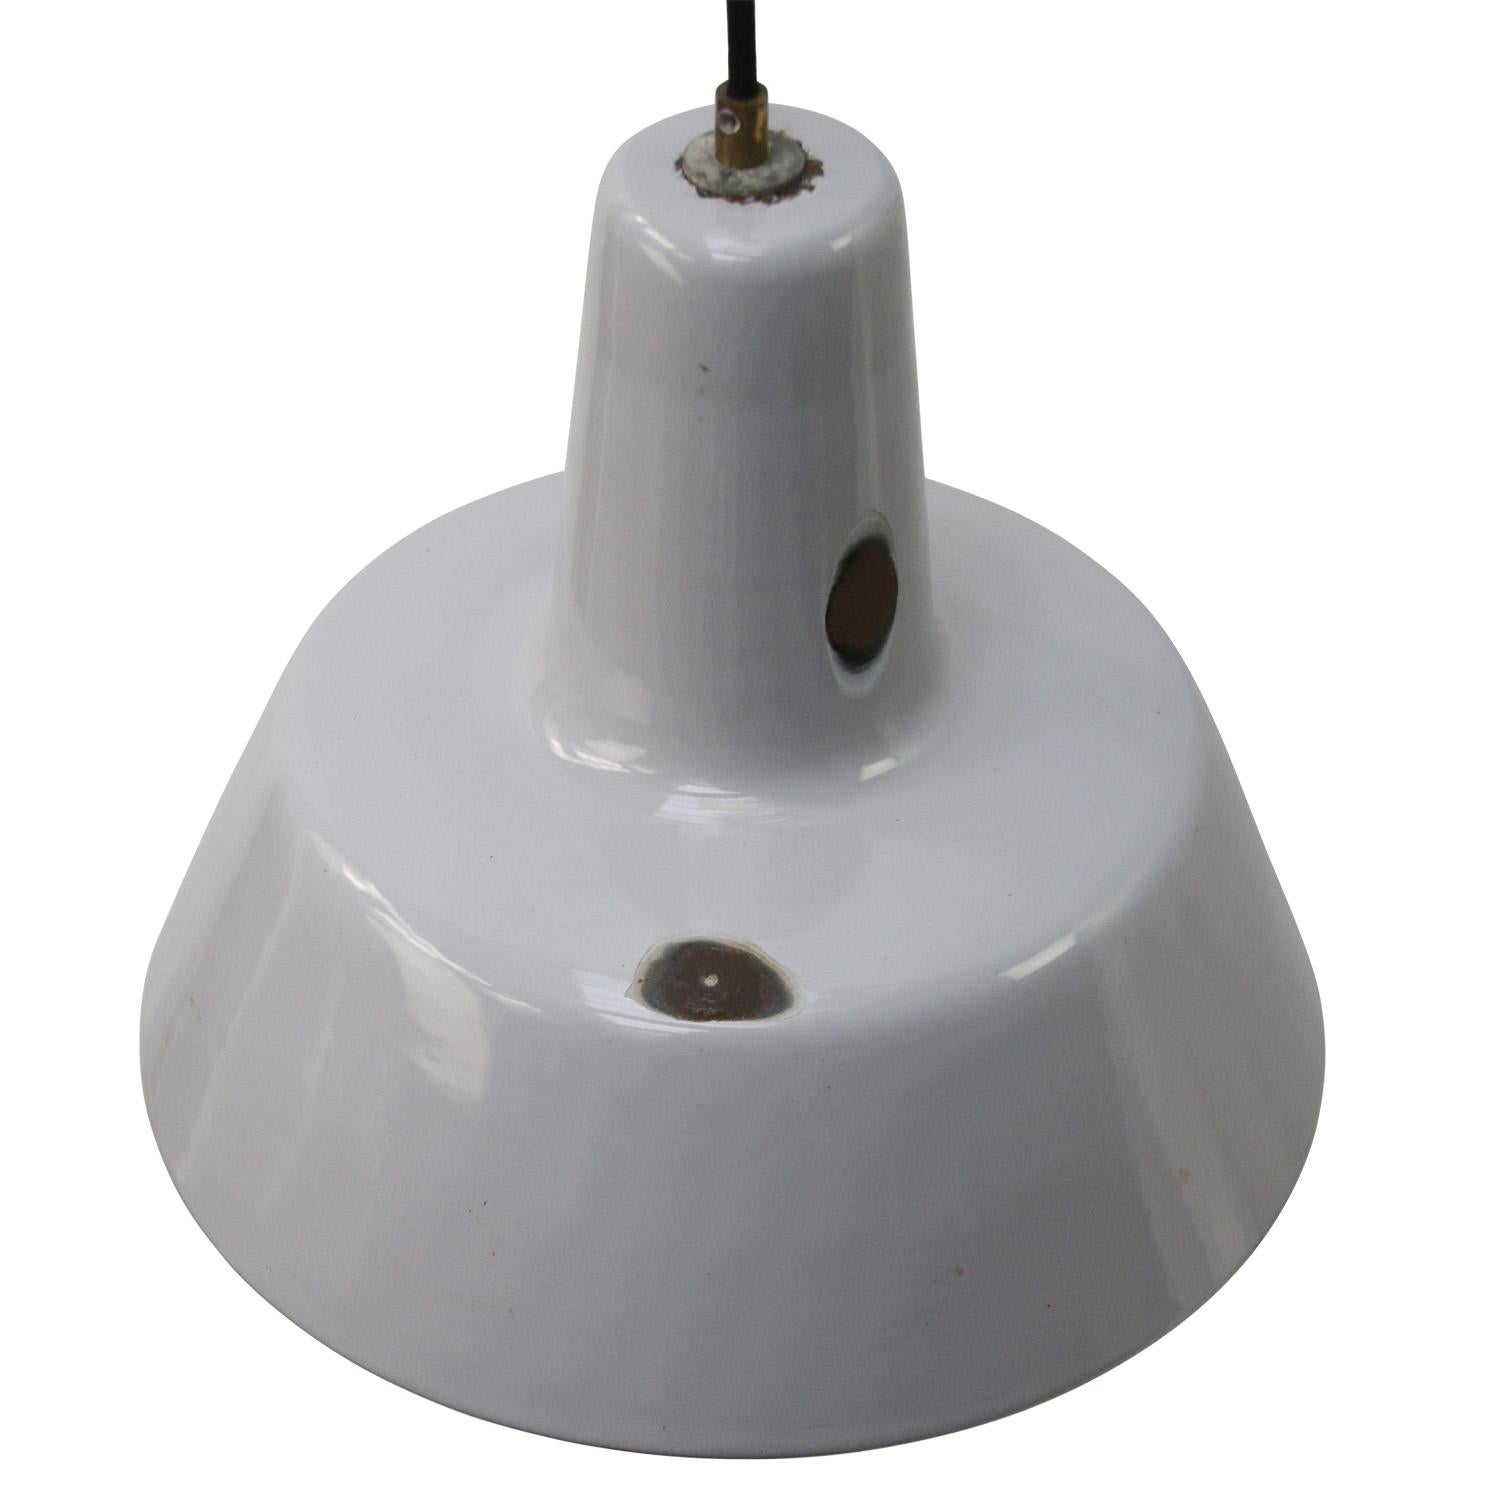 industrial hanging lamp made by Philips, Holland
Grey enamel white interior

Weight: 1.50 kg / 3.3 lb

Priced per individual item. All lamps have been made suitable by international standards for incandescent light bulbs, energy-efficient and